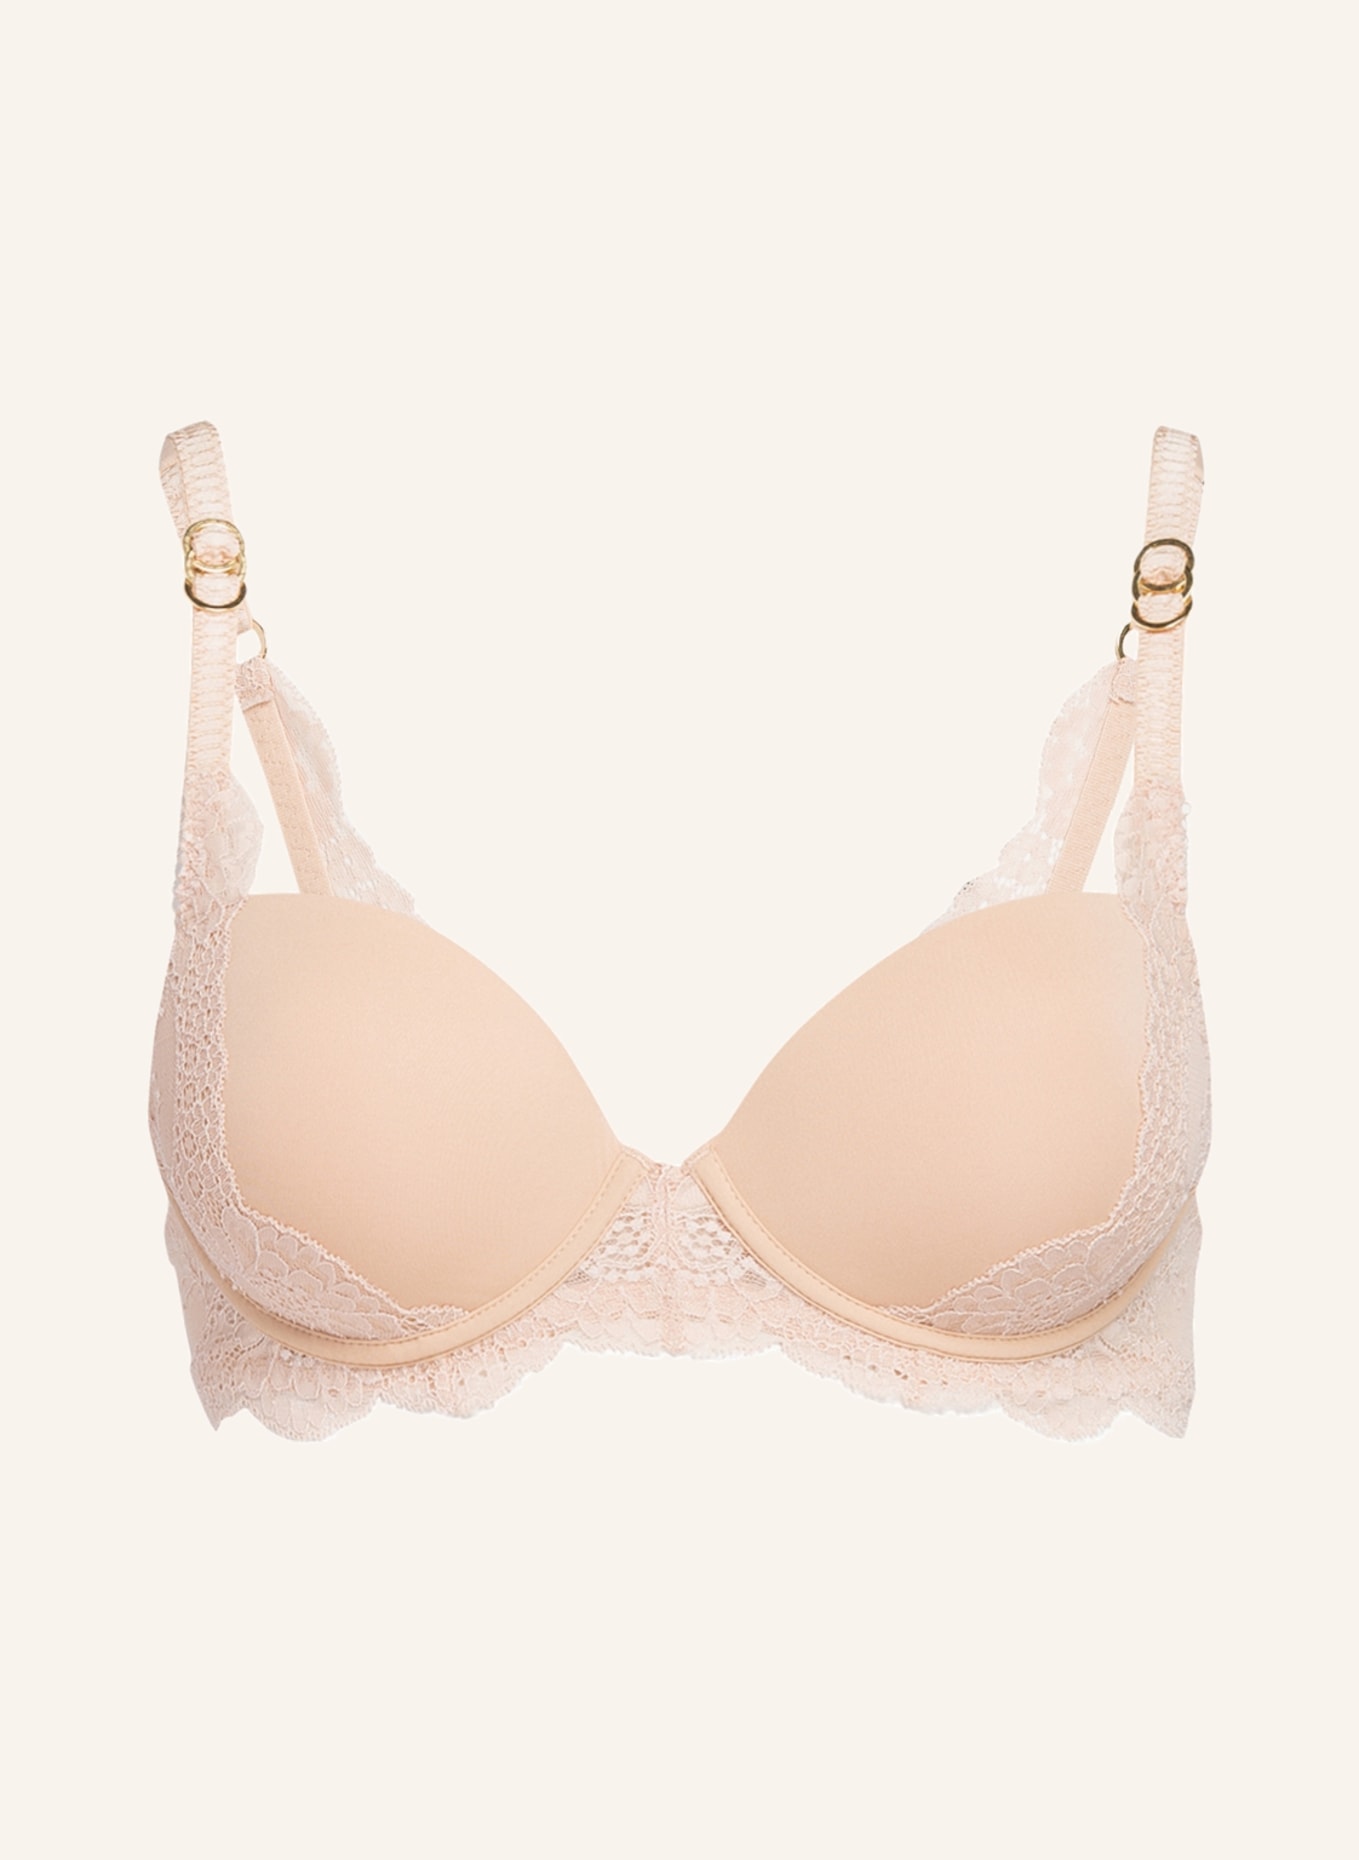 STELLA McCARTNEY LINGERIE Push-up-BH SMOOTH & LACE, Farbe: NUDE (Bild 1)